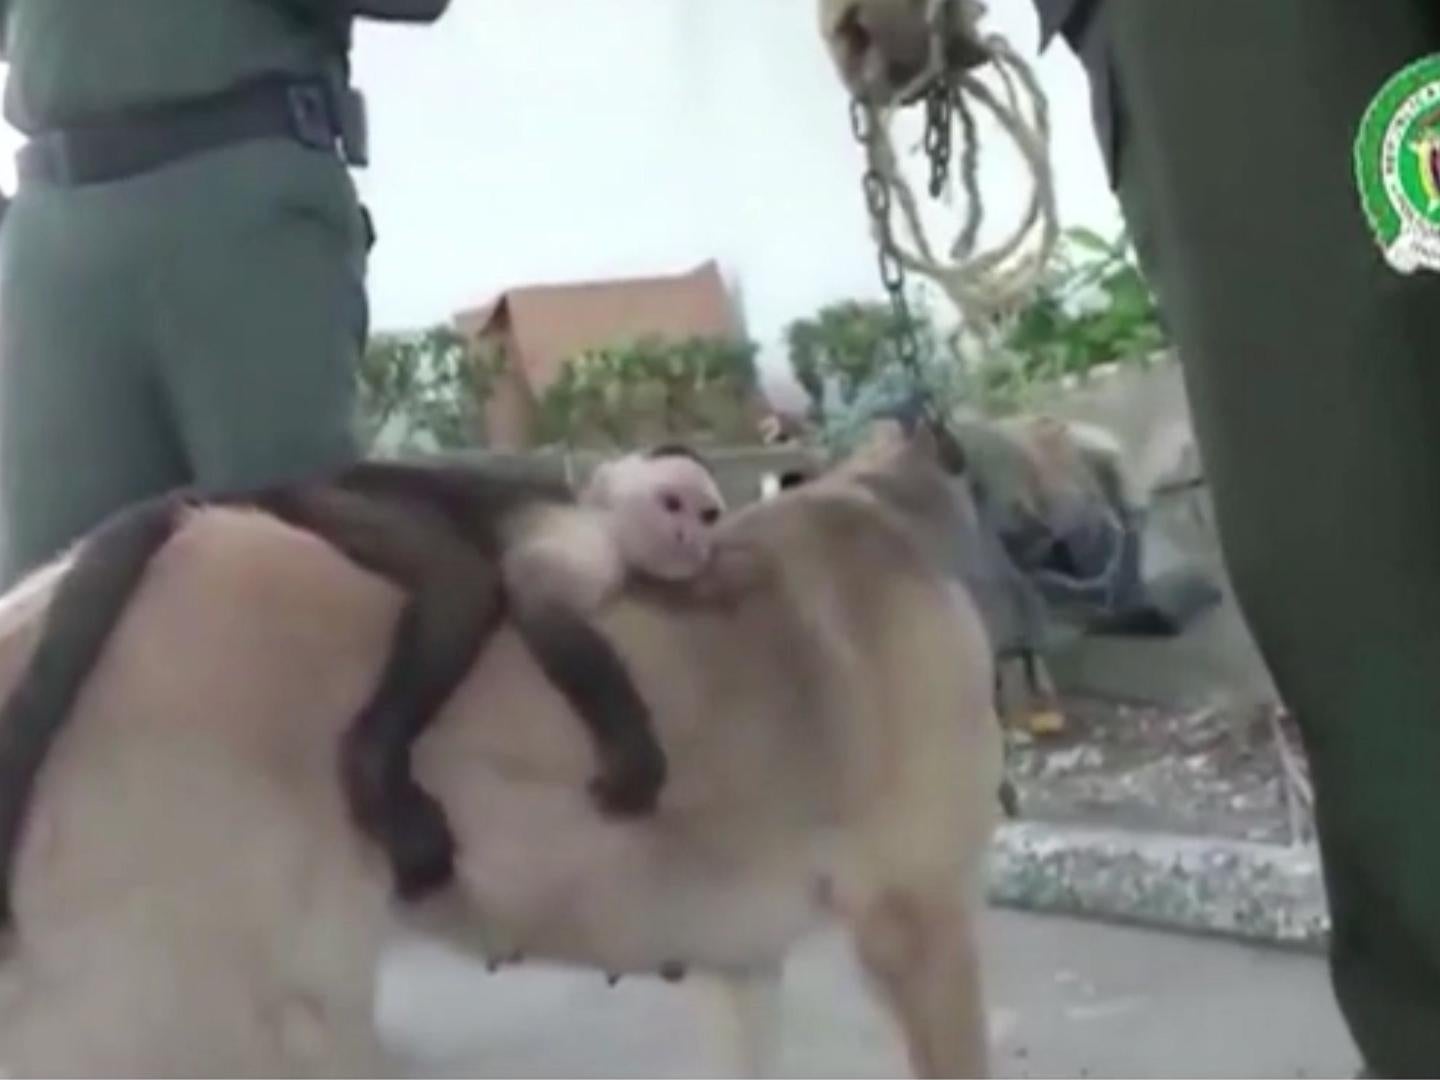 Monkey Xnxxvideos - Dog 'adopts' monkey after losing its puppies | The Independent